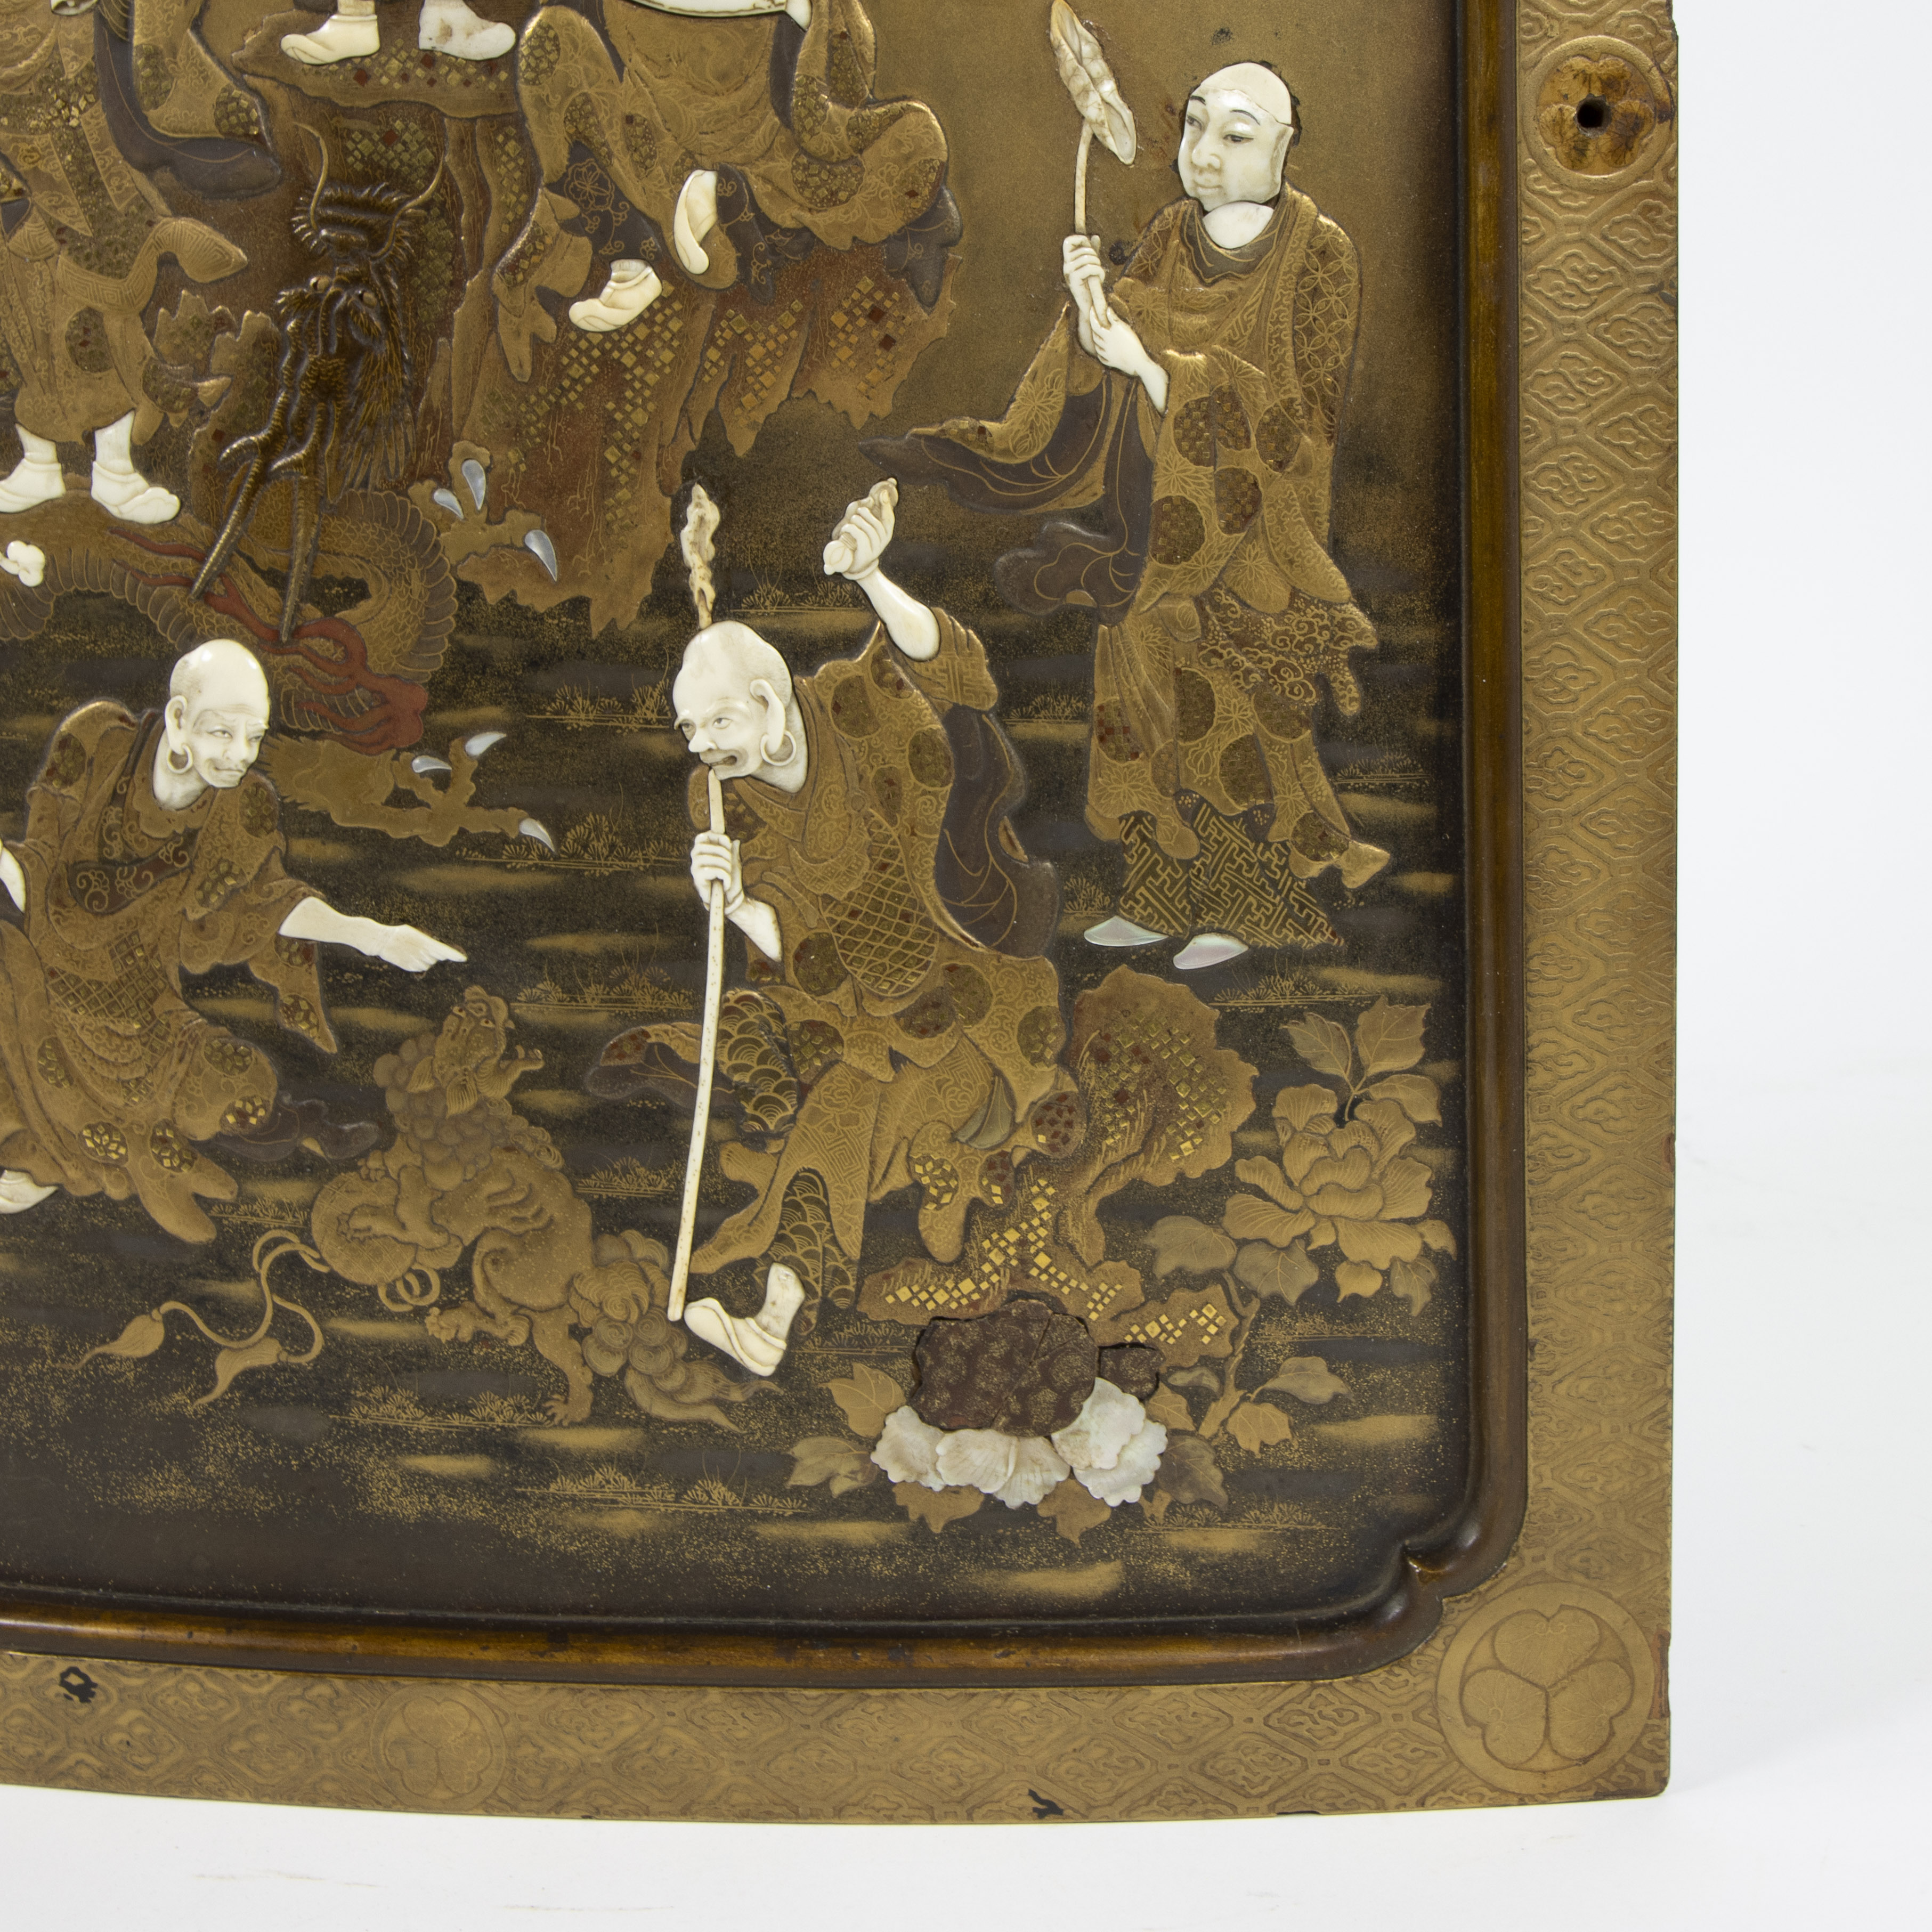 Lacquer cabinet door panel 19th century depicting 7 sage Gods with ivory heads and arms, Japanese Im - Image 3 of 10